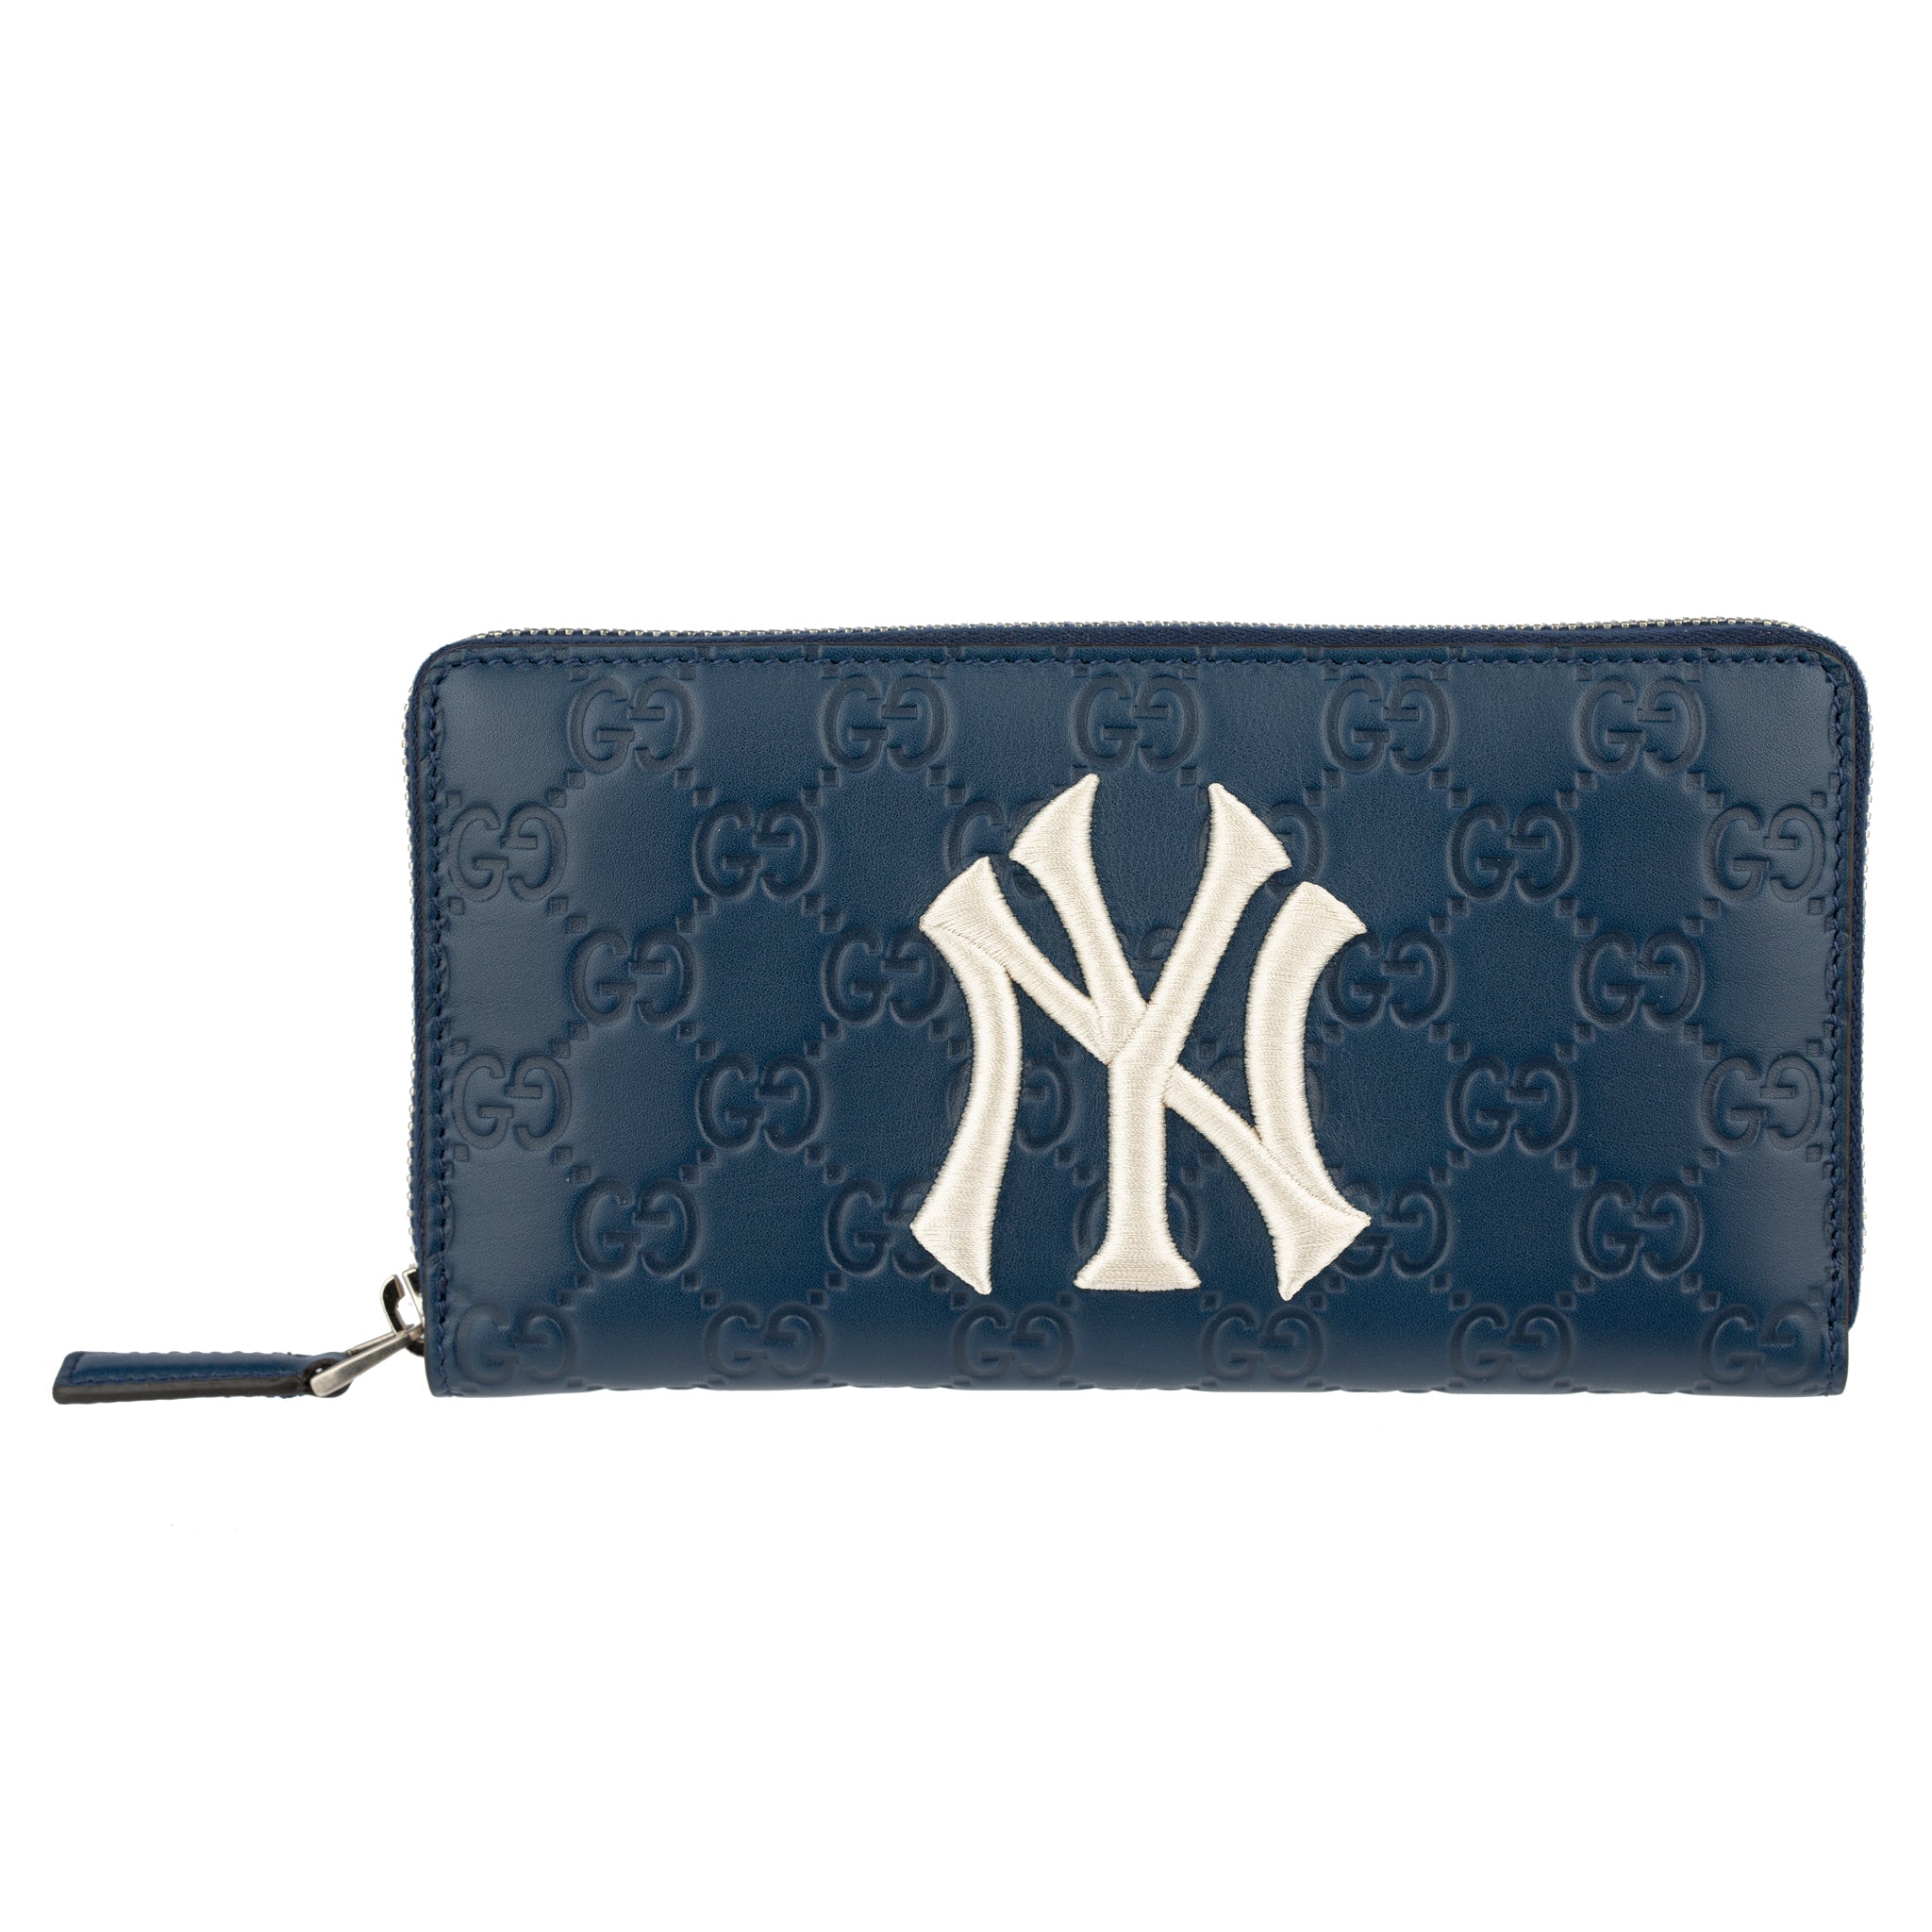 Gucci GG Wallet Navy Leather "NY" New York Yankees Logo - On Repeat